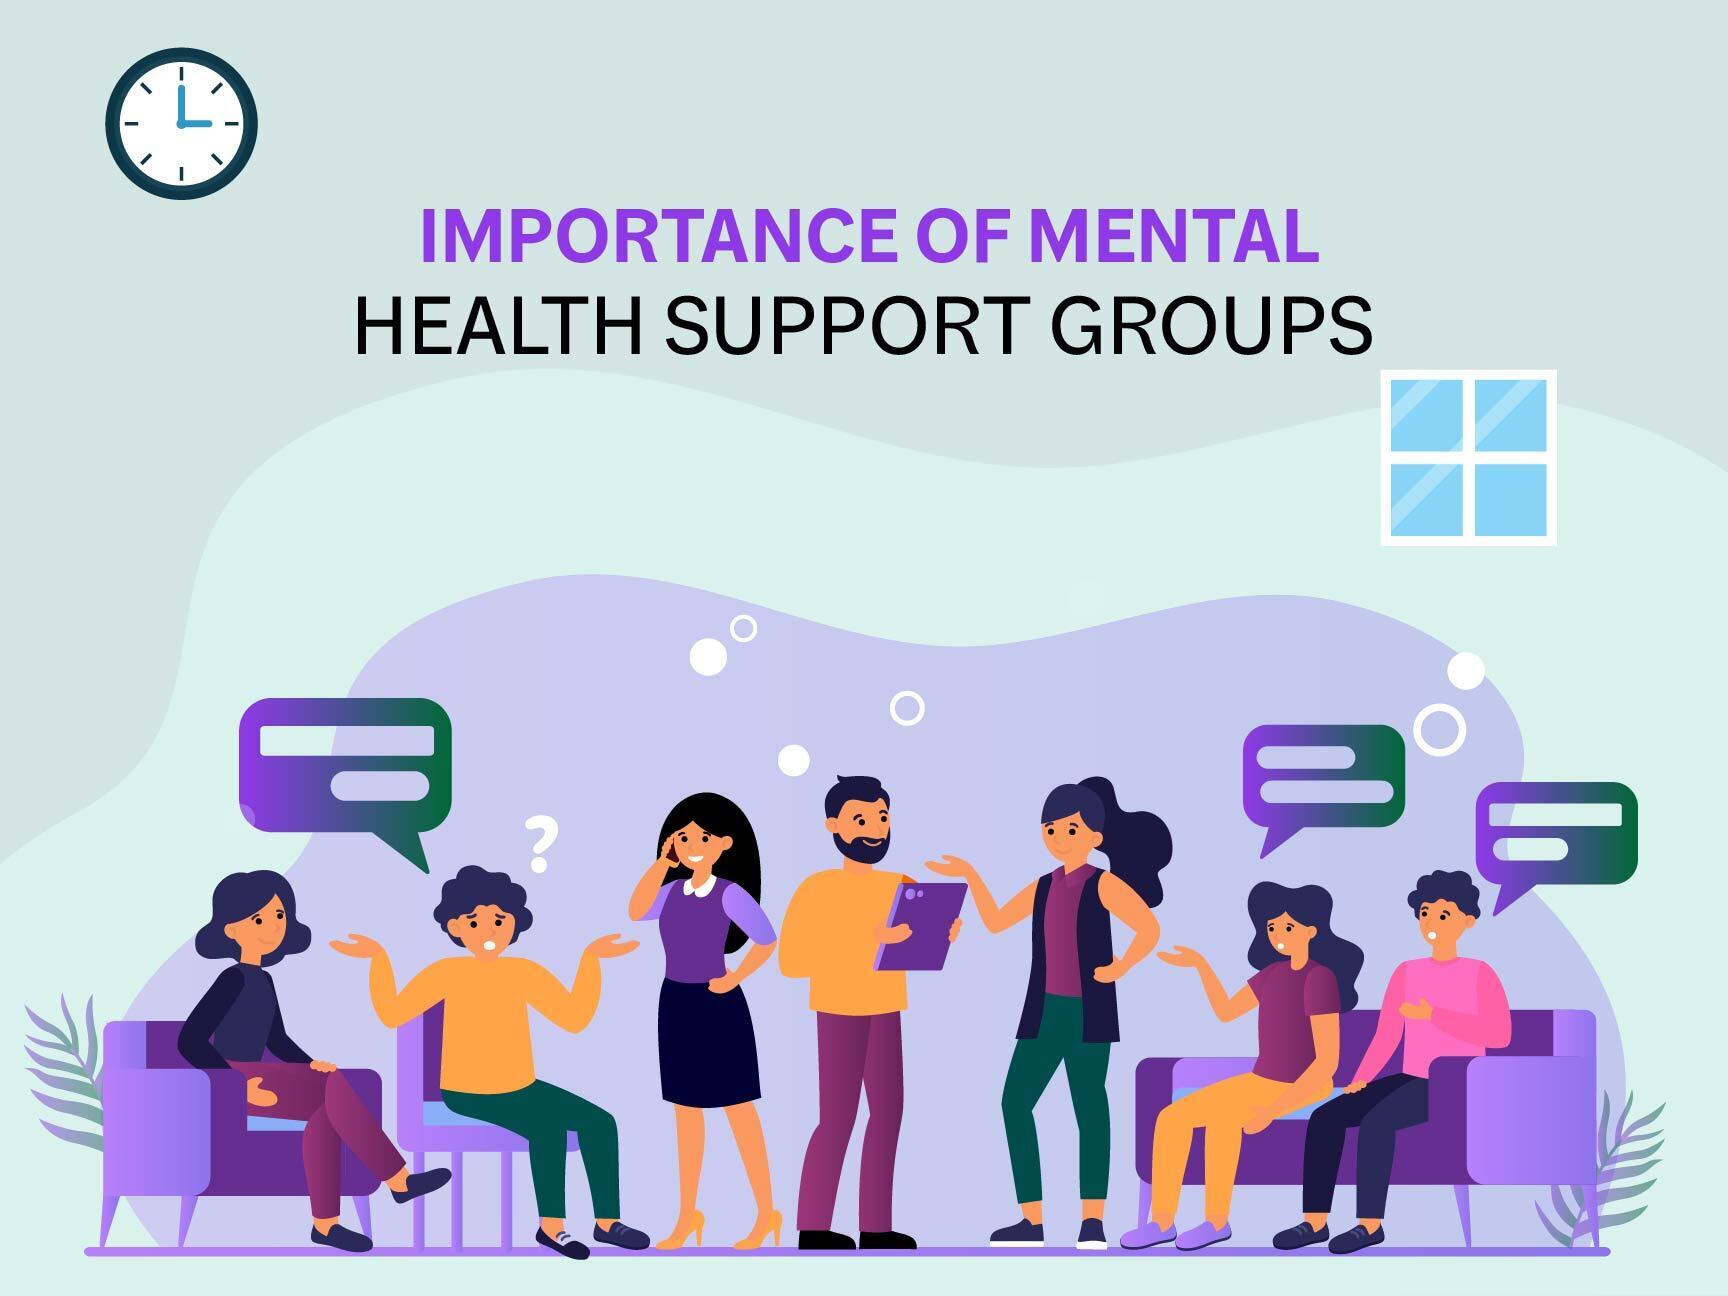 Importance of Mental Health Support Groups